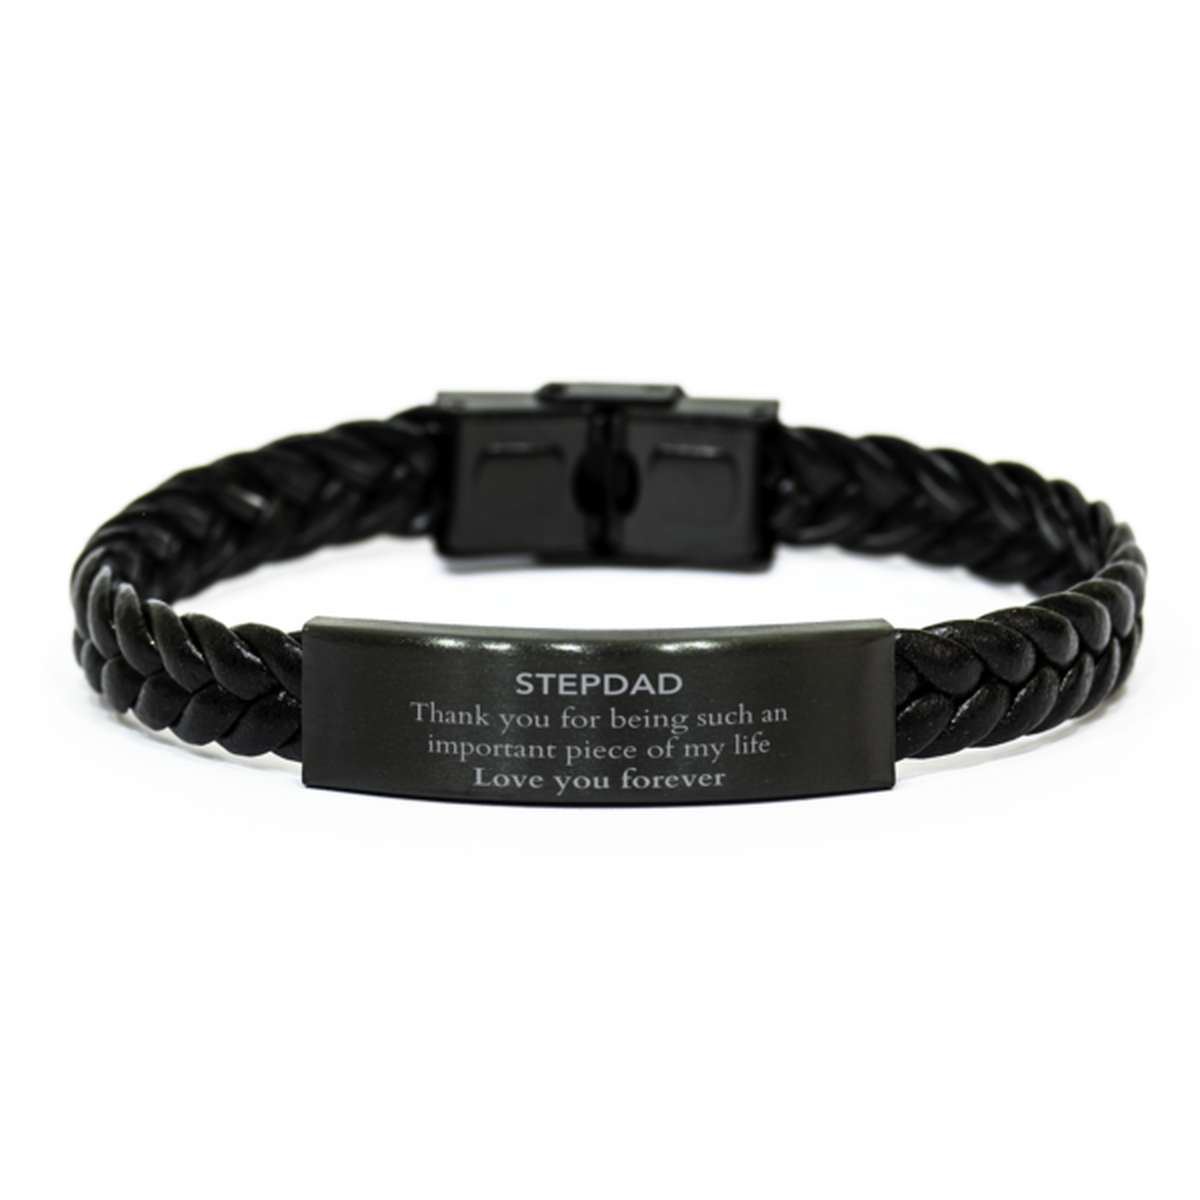 Appropriate Stepdad Braided Leather Bracelet Epic Birthday Gifts for Stepdad Thank you for being such an important piece of my life Stepdad Christmas Mothers Fathers Day